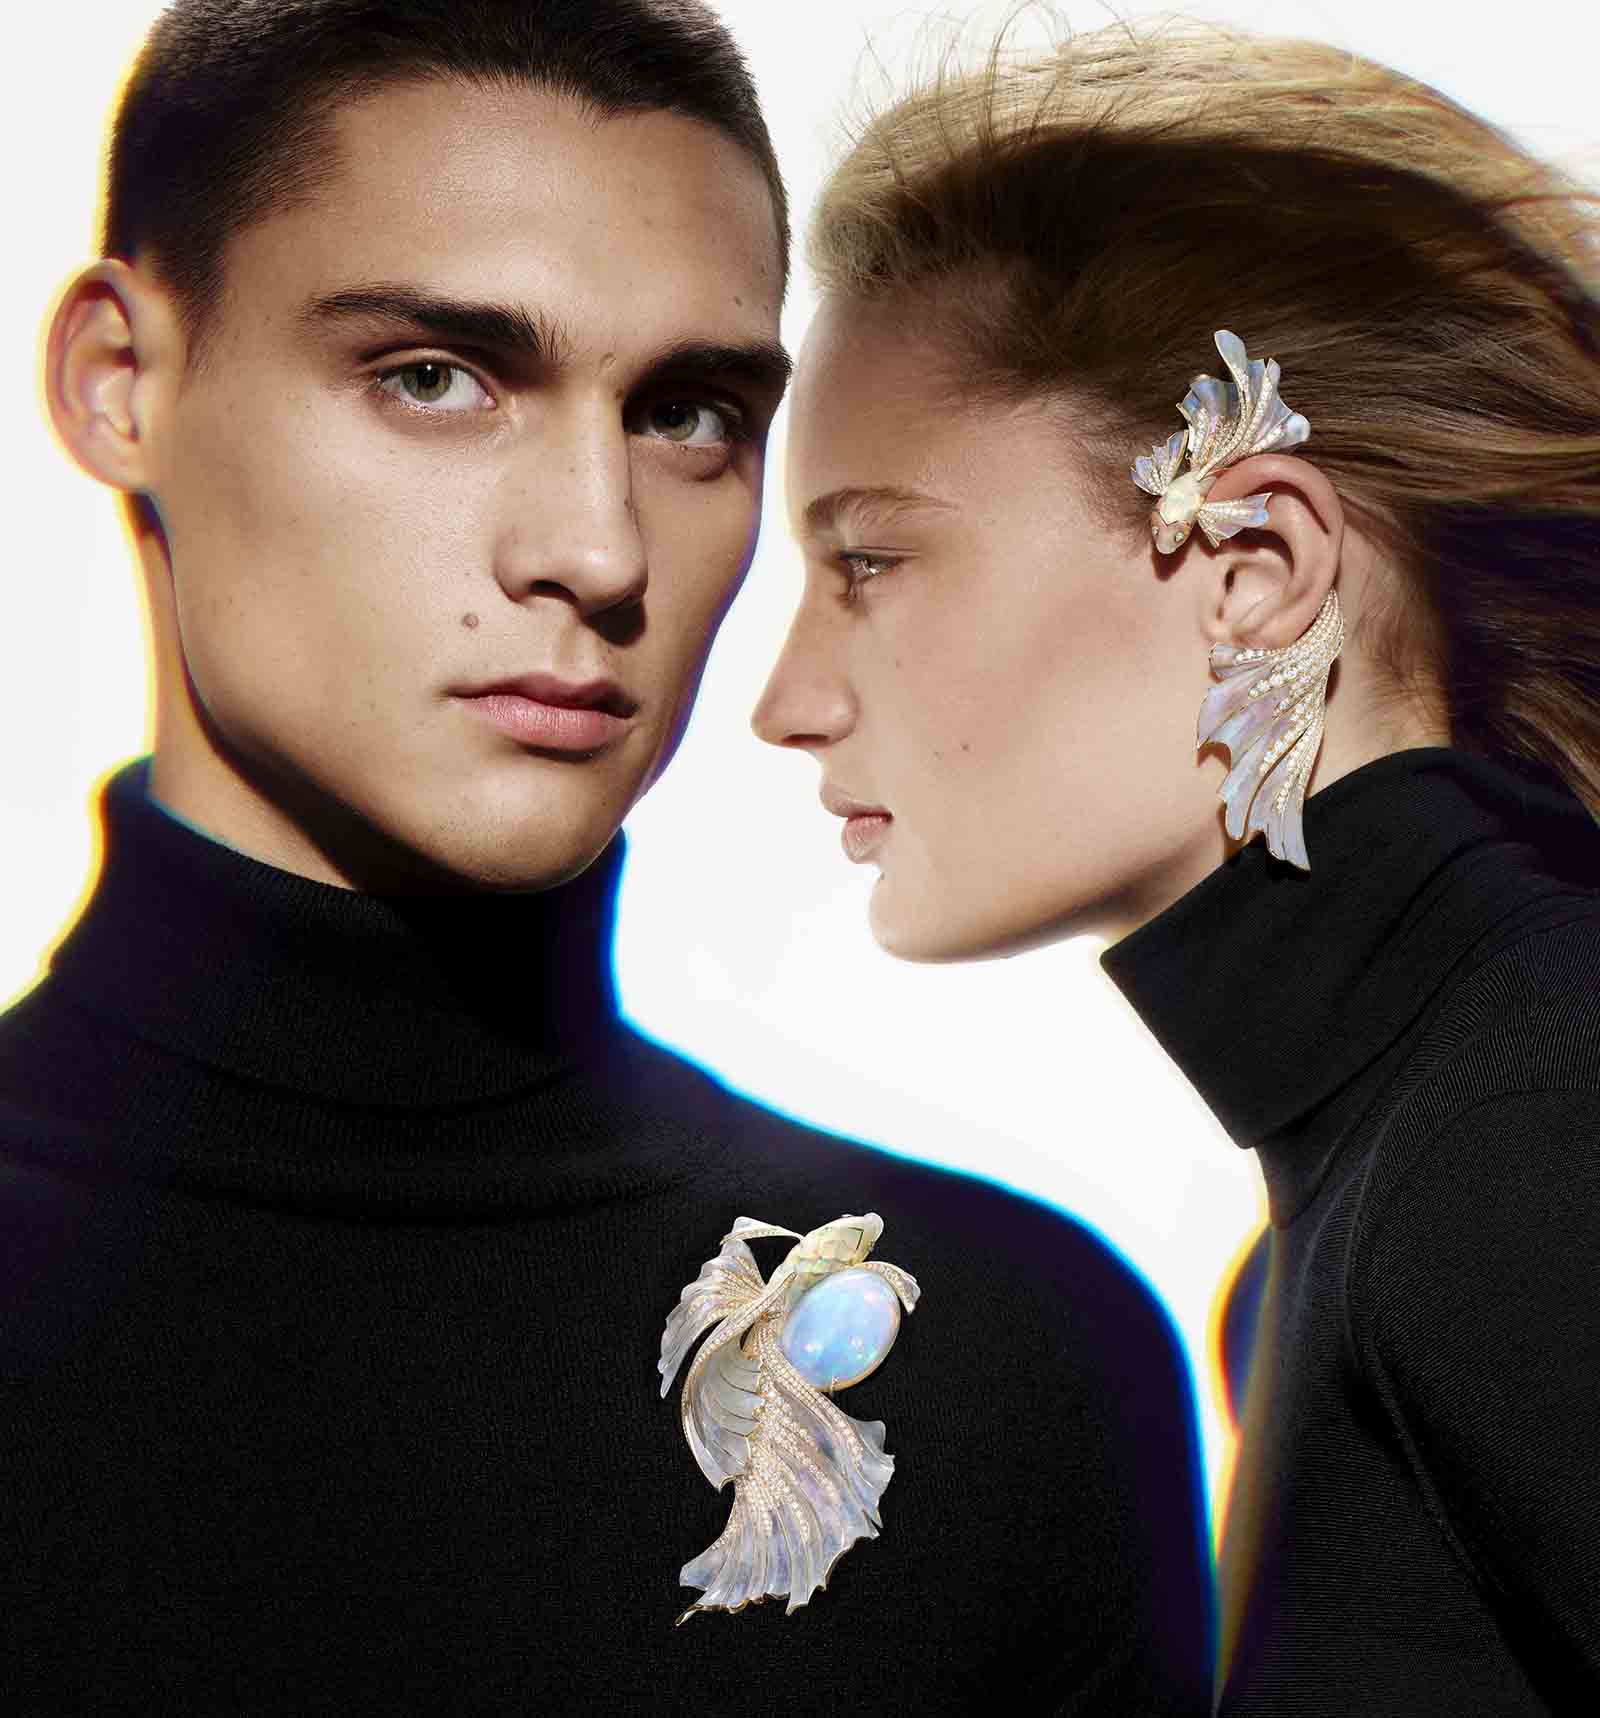 Models wear the Opalsecence brooch and ear pendant set with opals and diamonds from the Boucheron Holographique High Jewellery collection